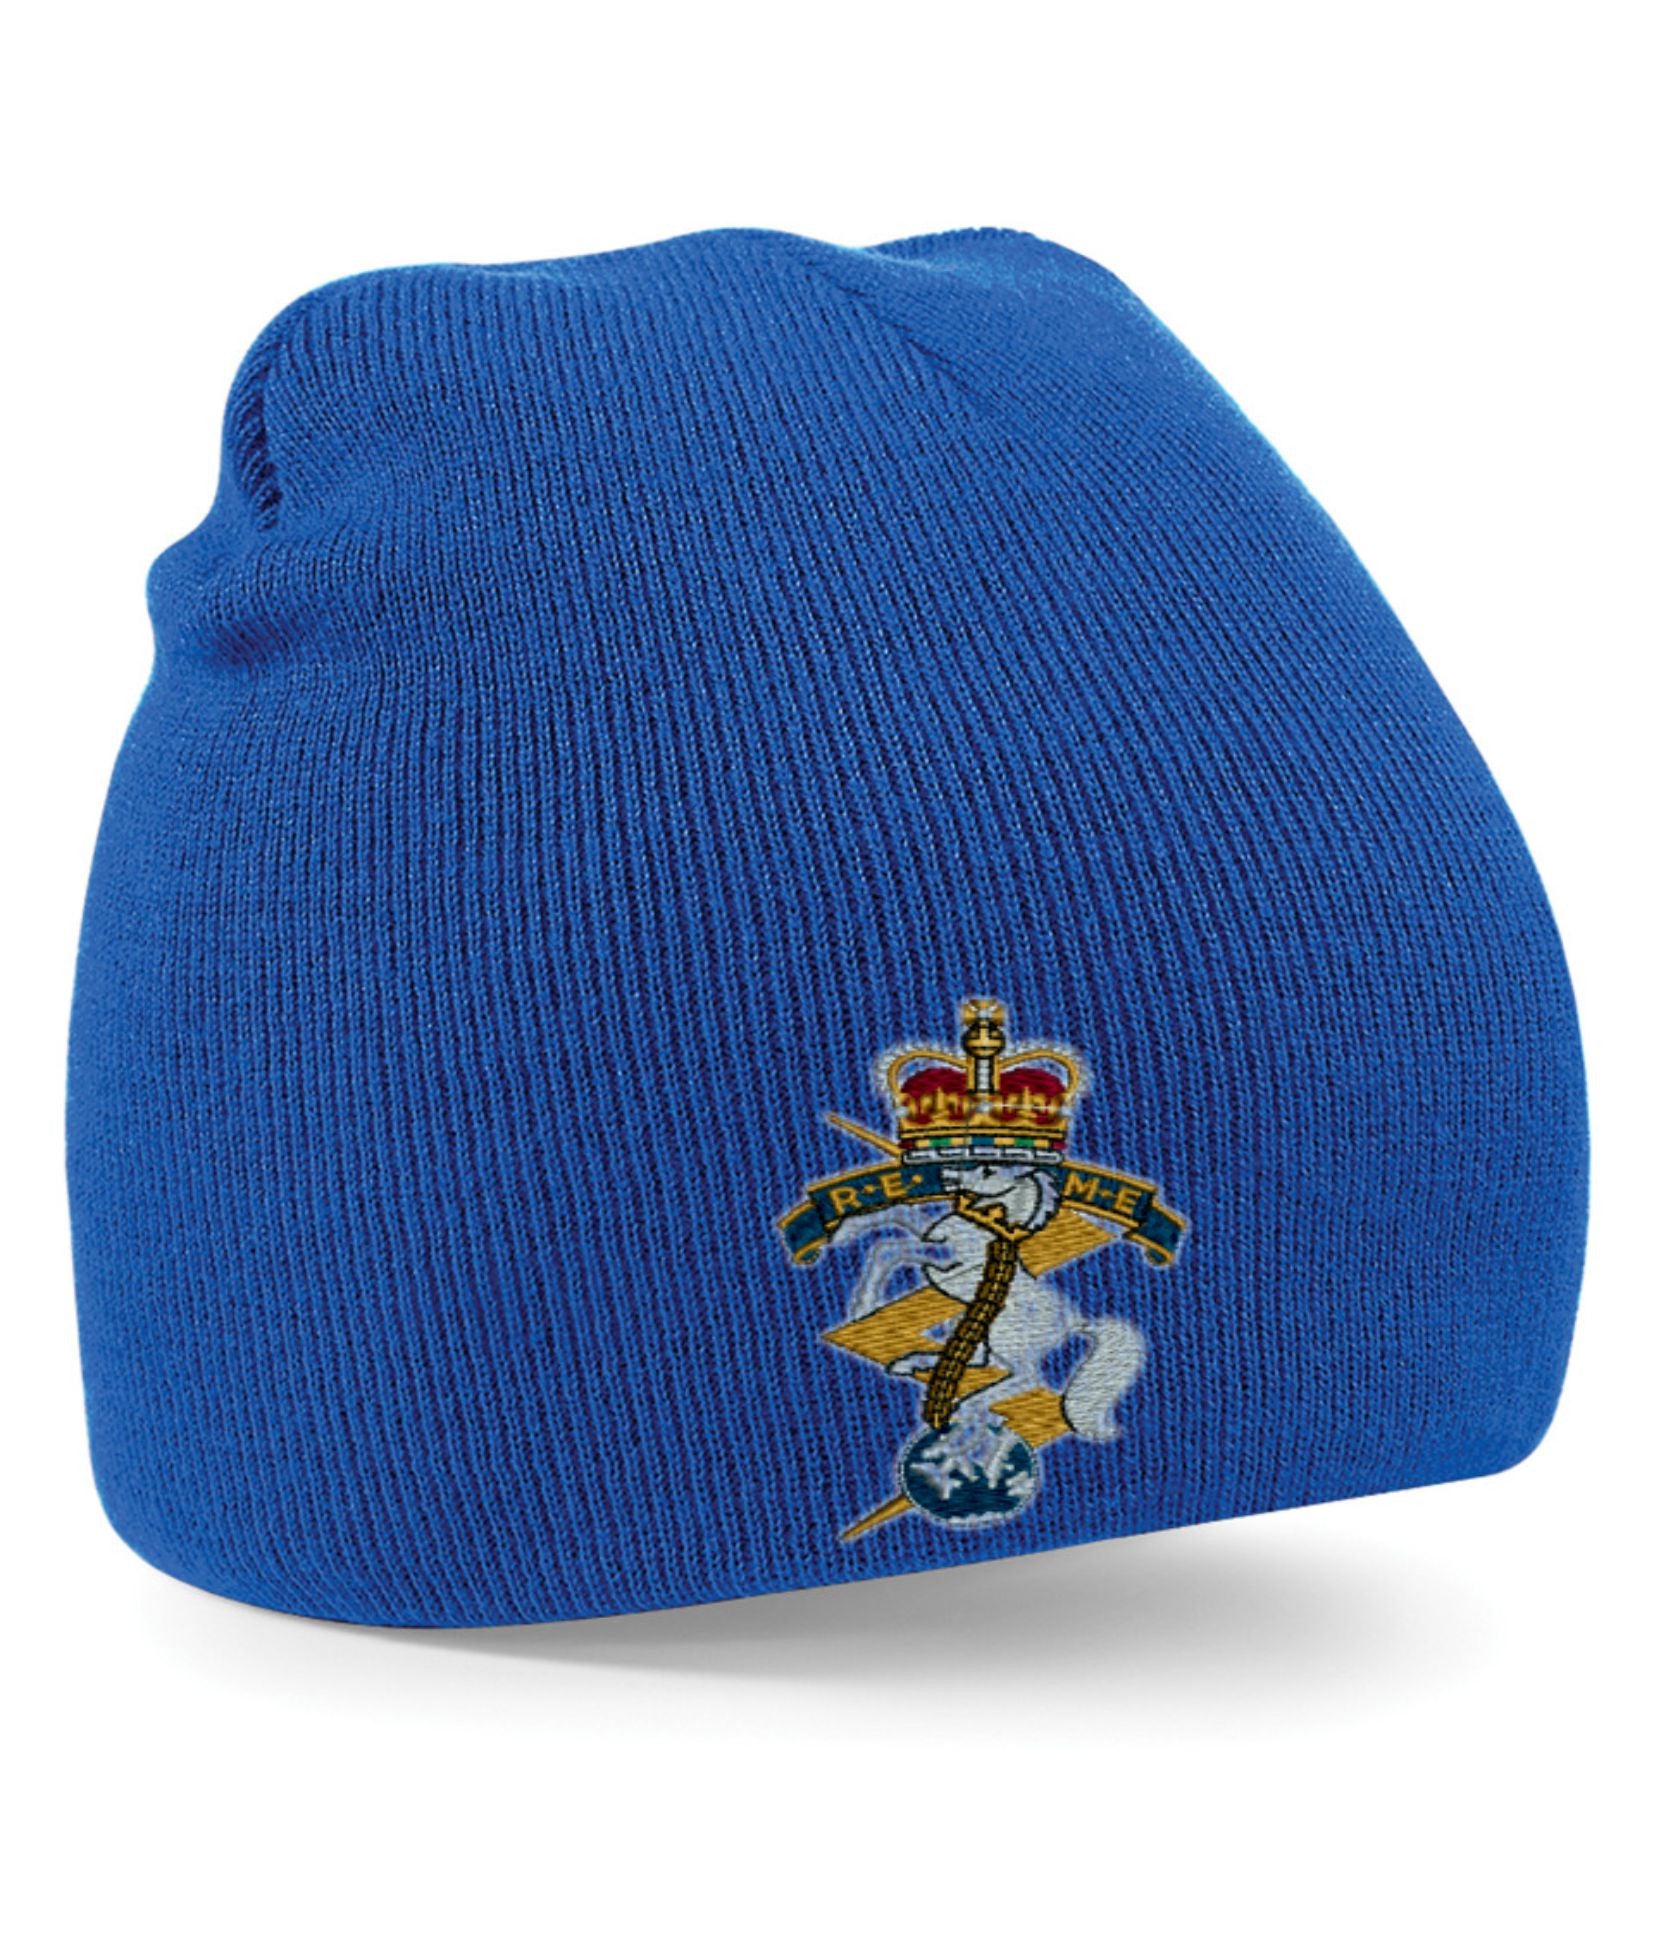 REME (Royal Electrical & Mechanical Engineers) Beanie Hat